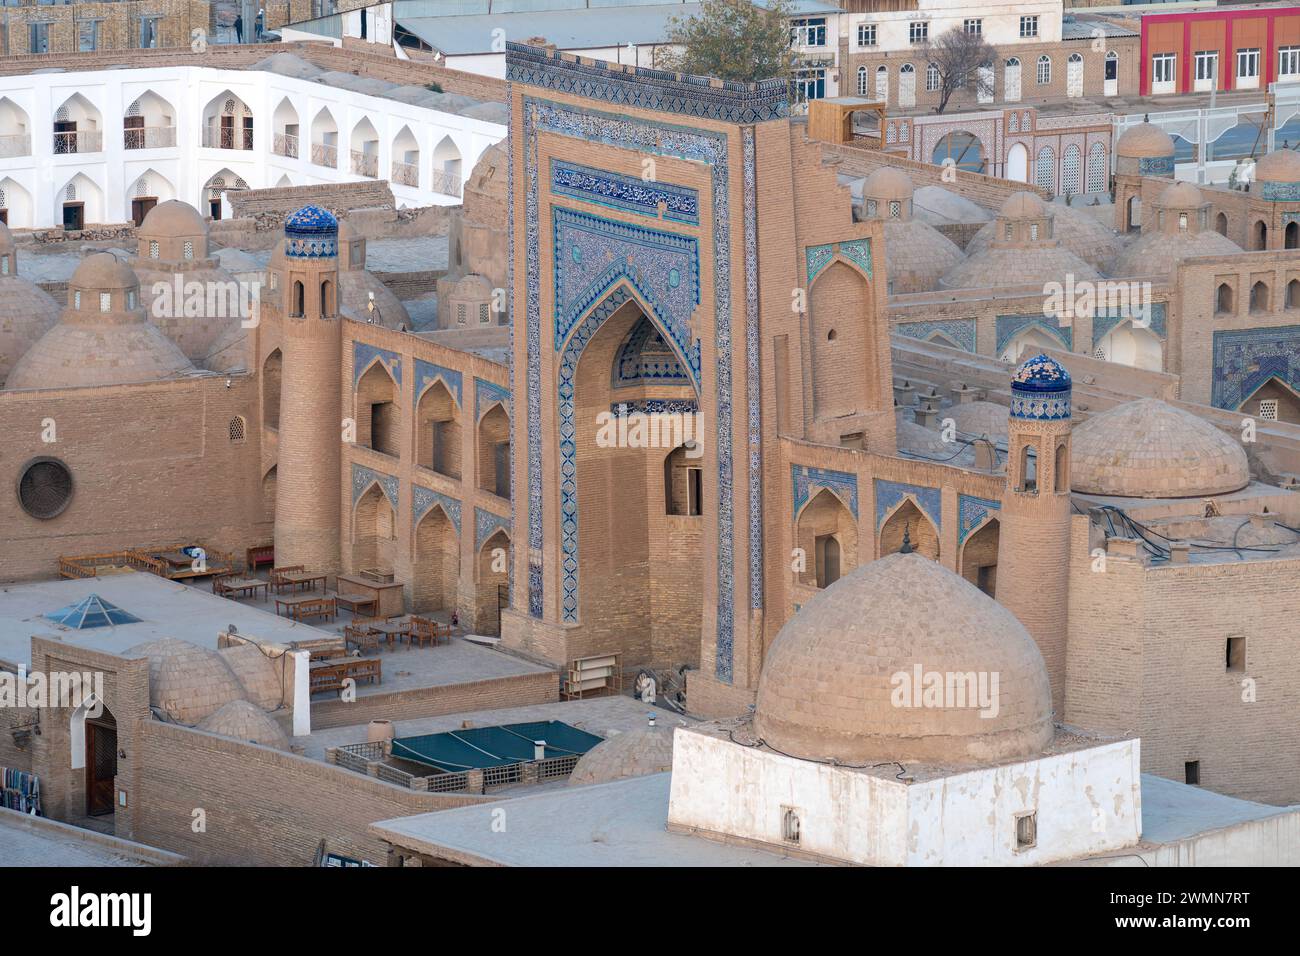 Allakuli Khan Madrasah at Itchan Kala, the old town of Khiva. A UNESCO heritage site in Uzbekistan top view, Stock Photo